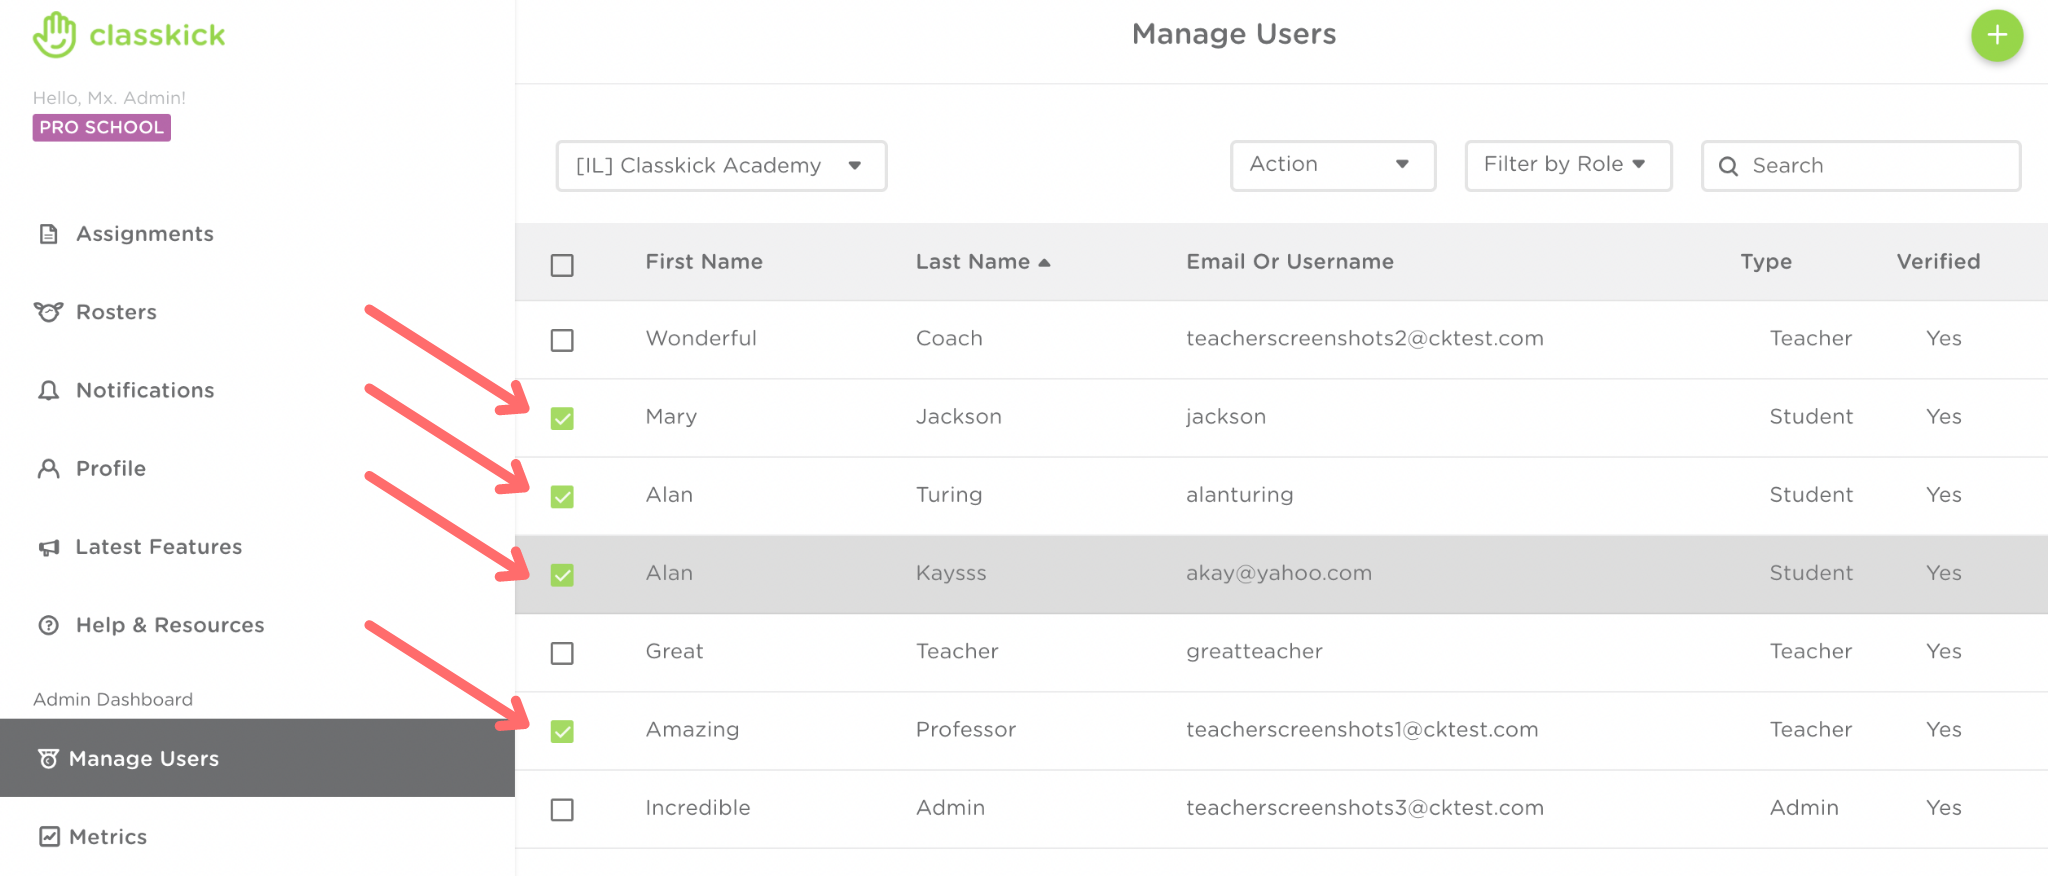 The manage users view in the admin dashboard. Multiple red arrows point to selected checkboxes next to users' names.